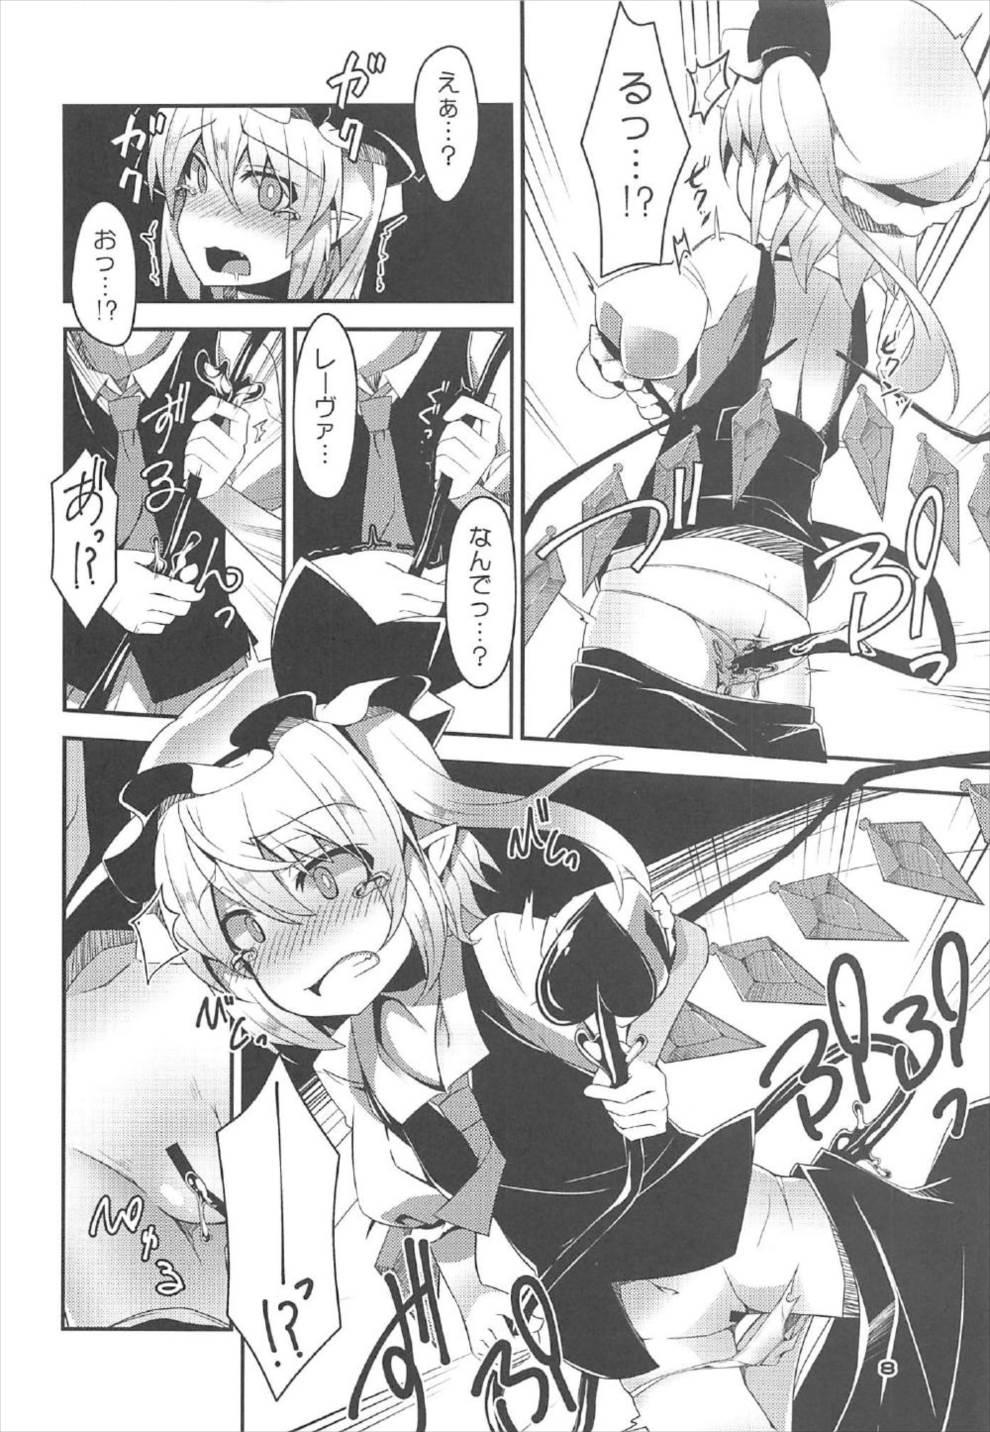 Rope Flan-chan no Ero Trap Dungeon ERO STATUS - Touhou project Ikillitts - Page 7